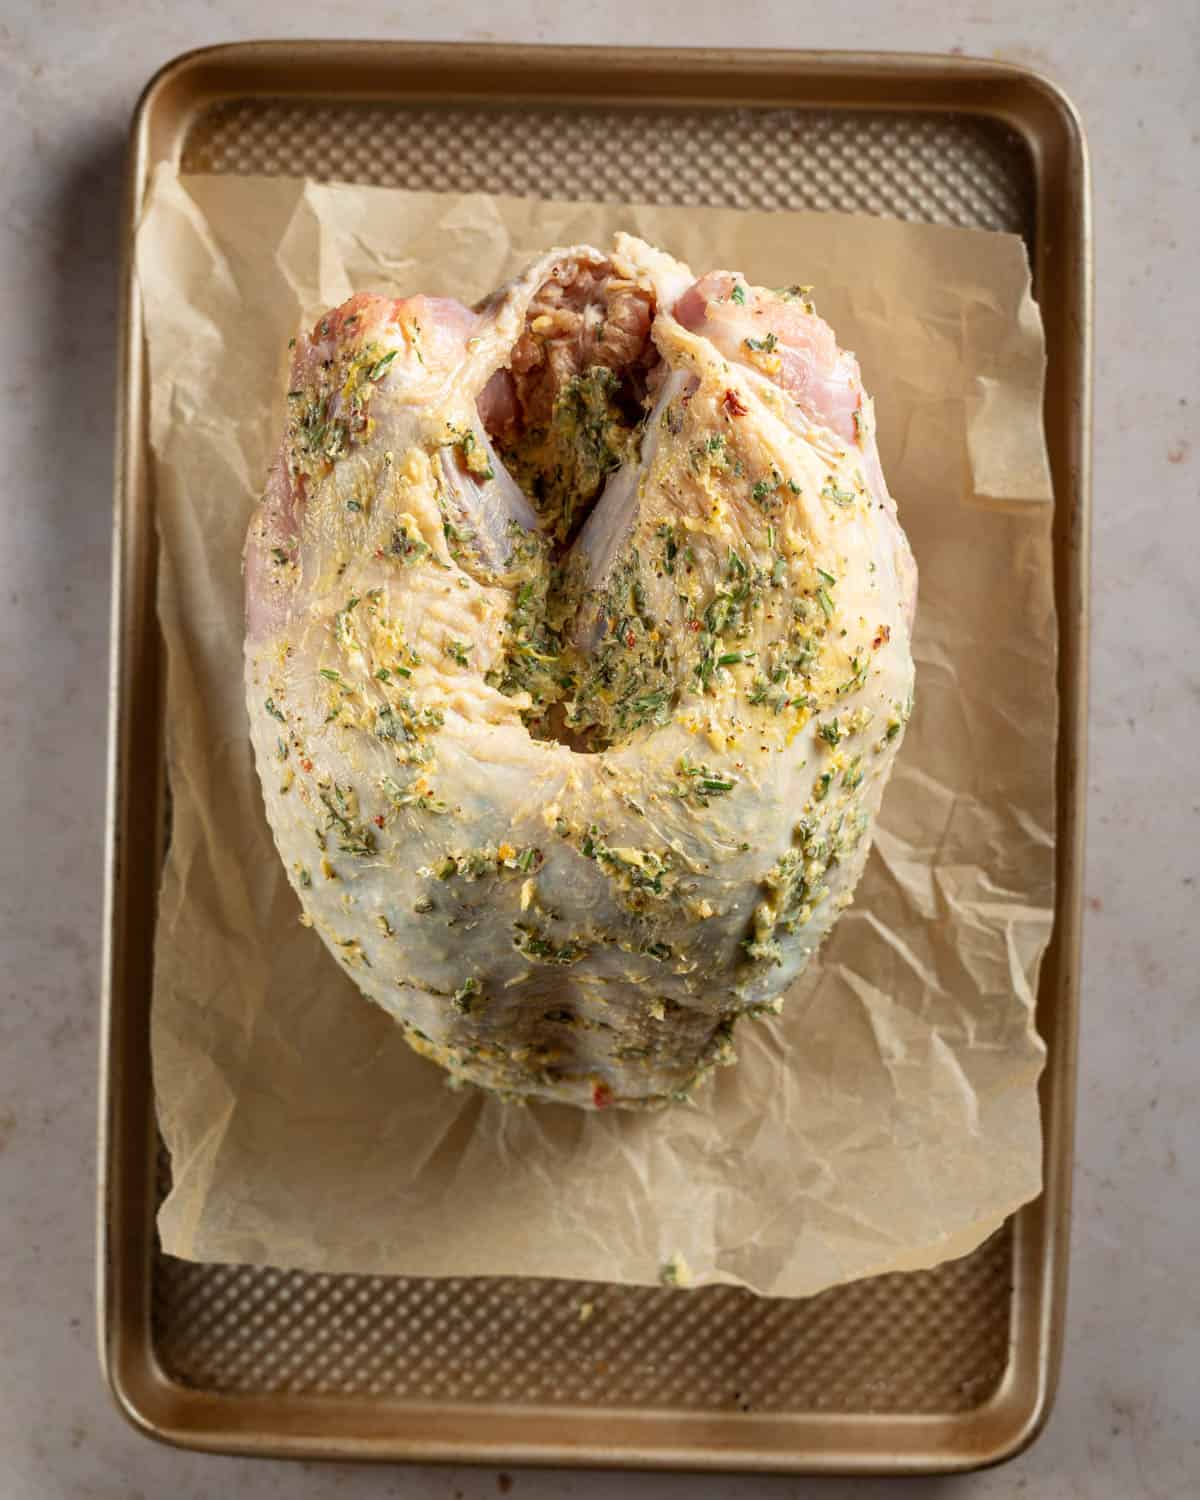 Turkey breast coated in garlic and herb butter on a baking sheet.